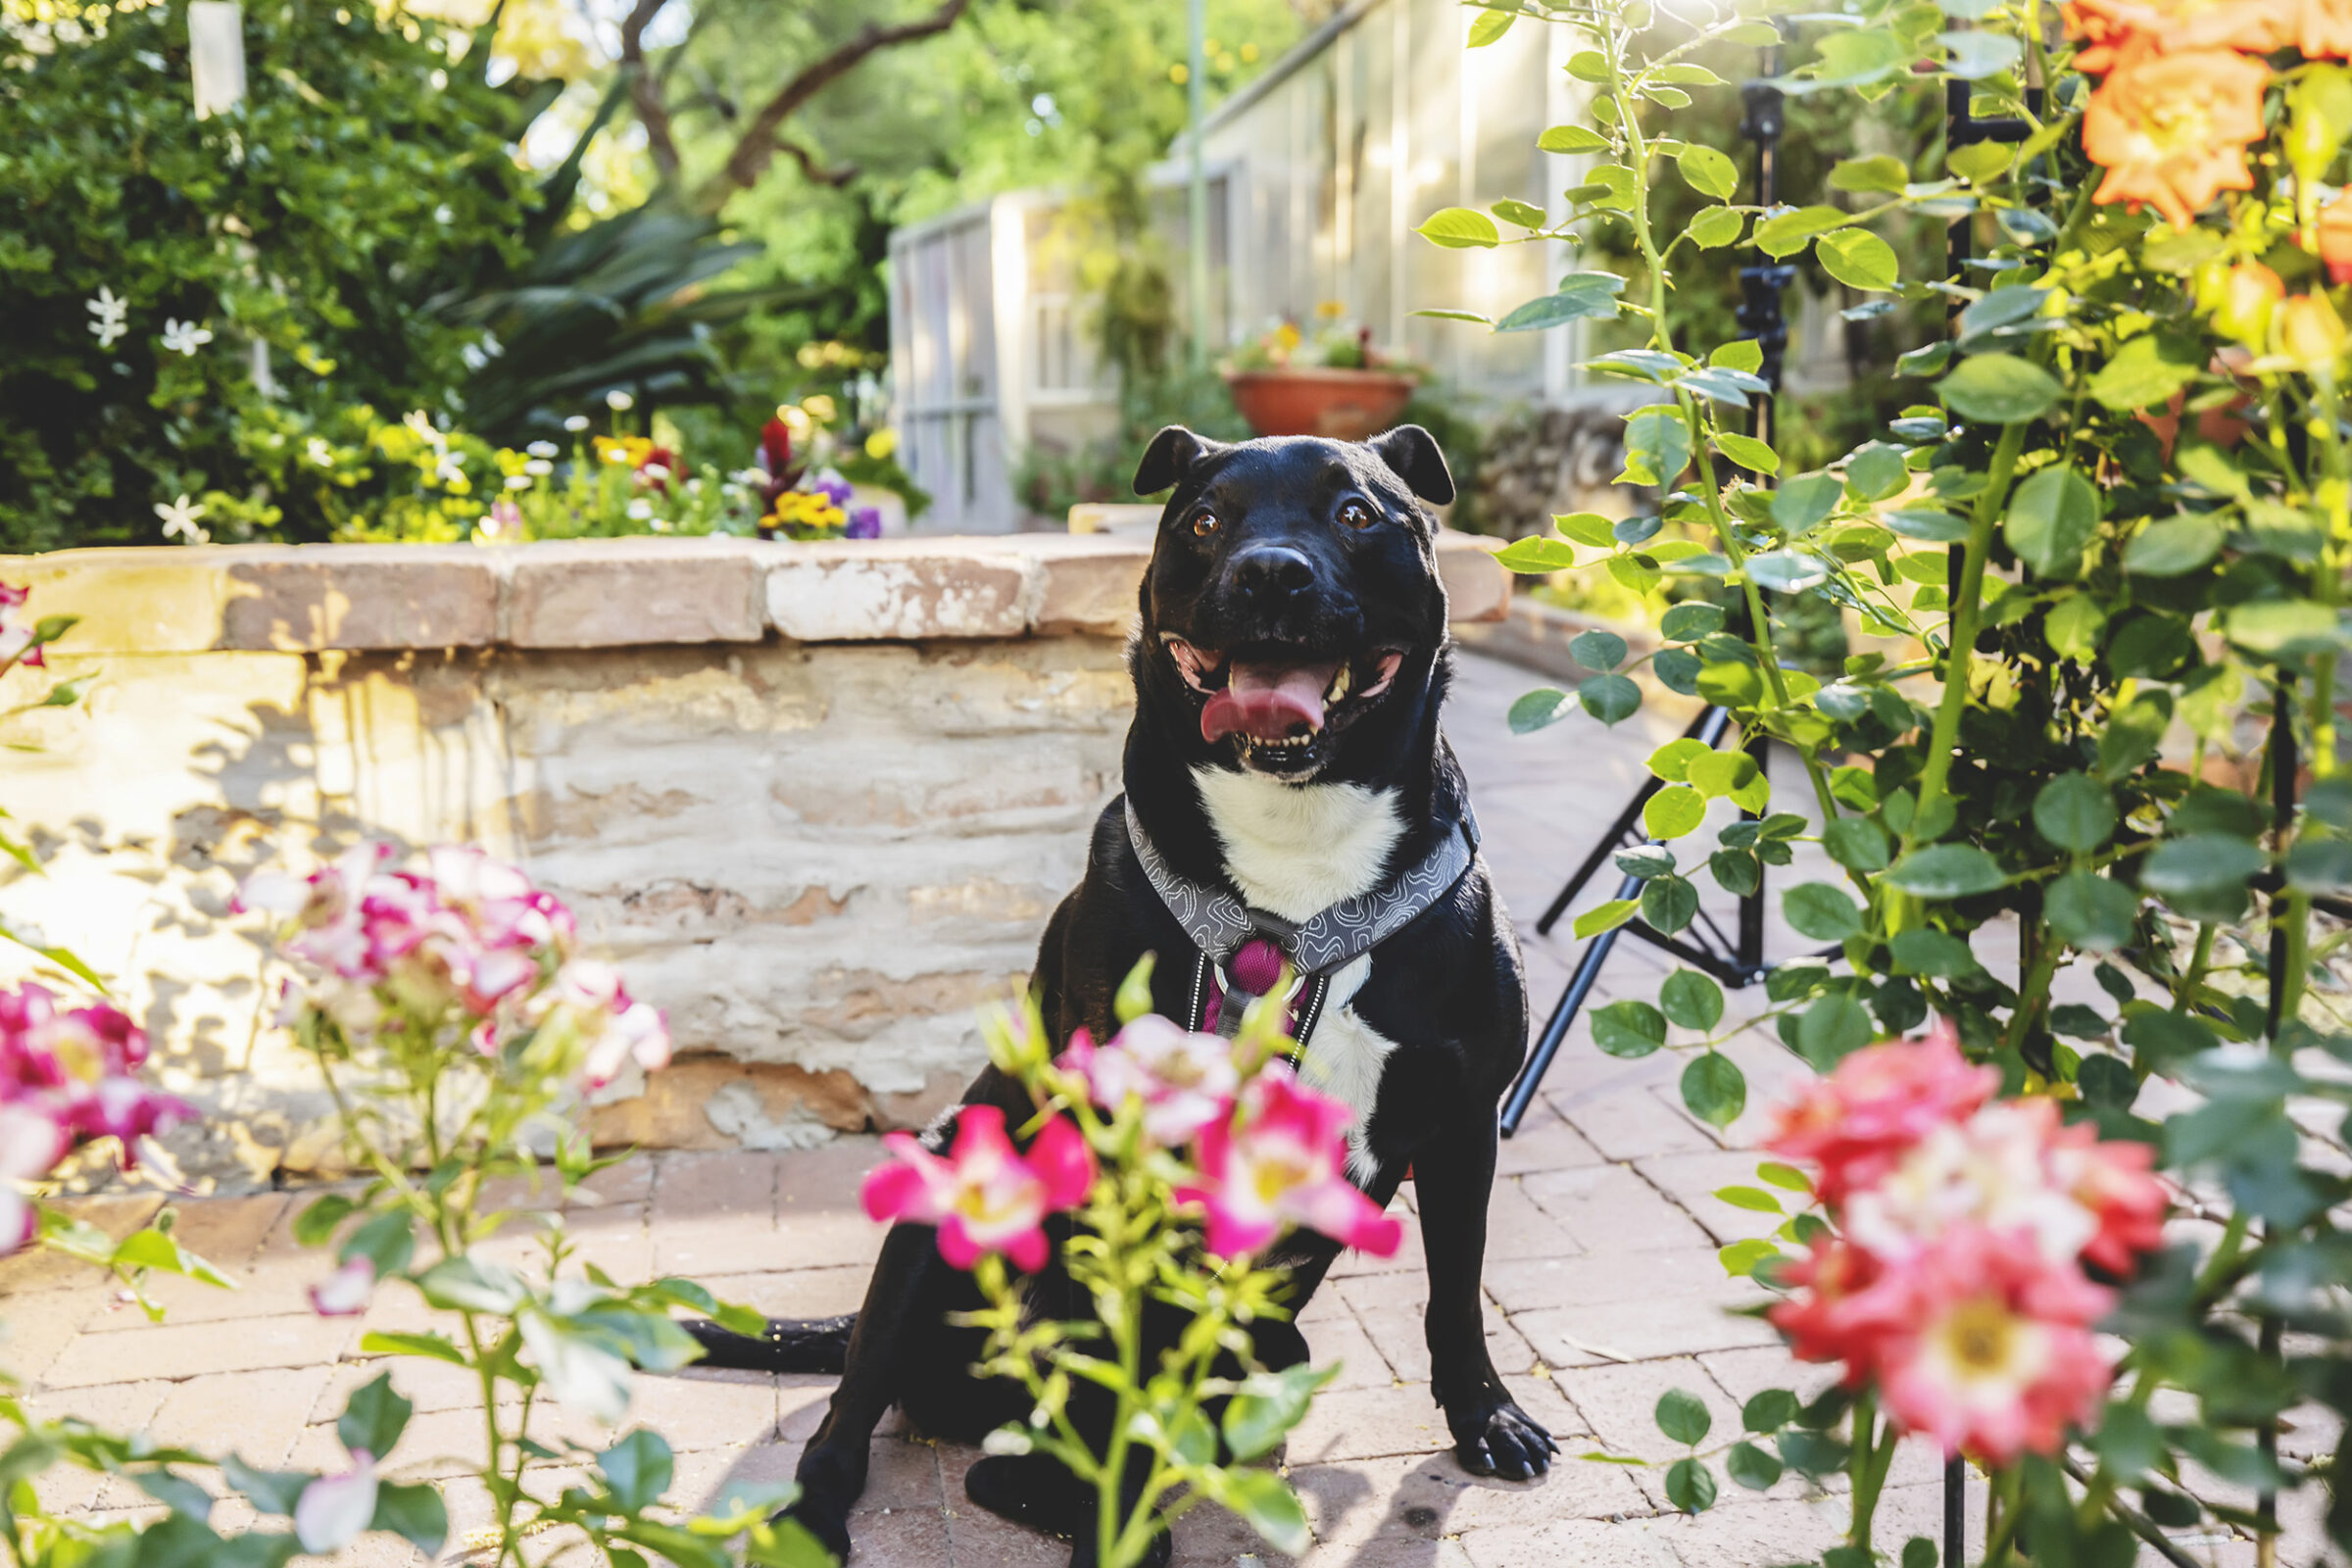 Photograph of a dog in the gardens